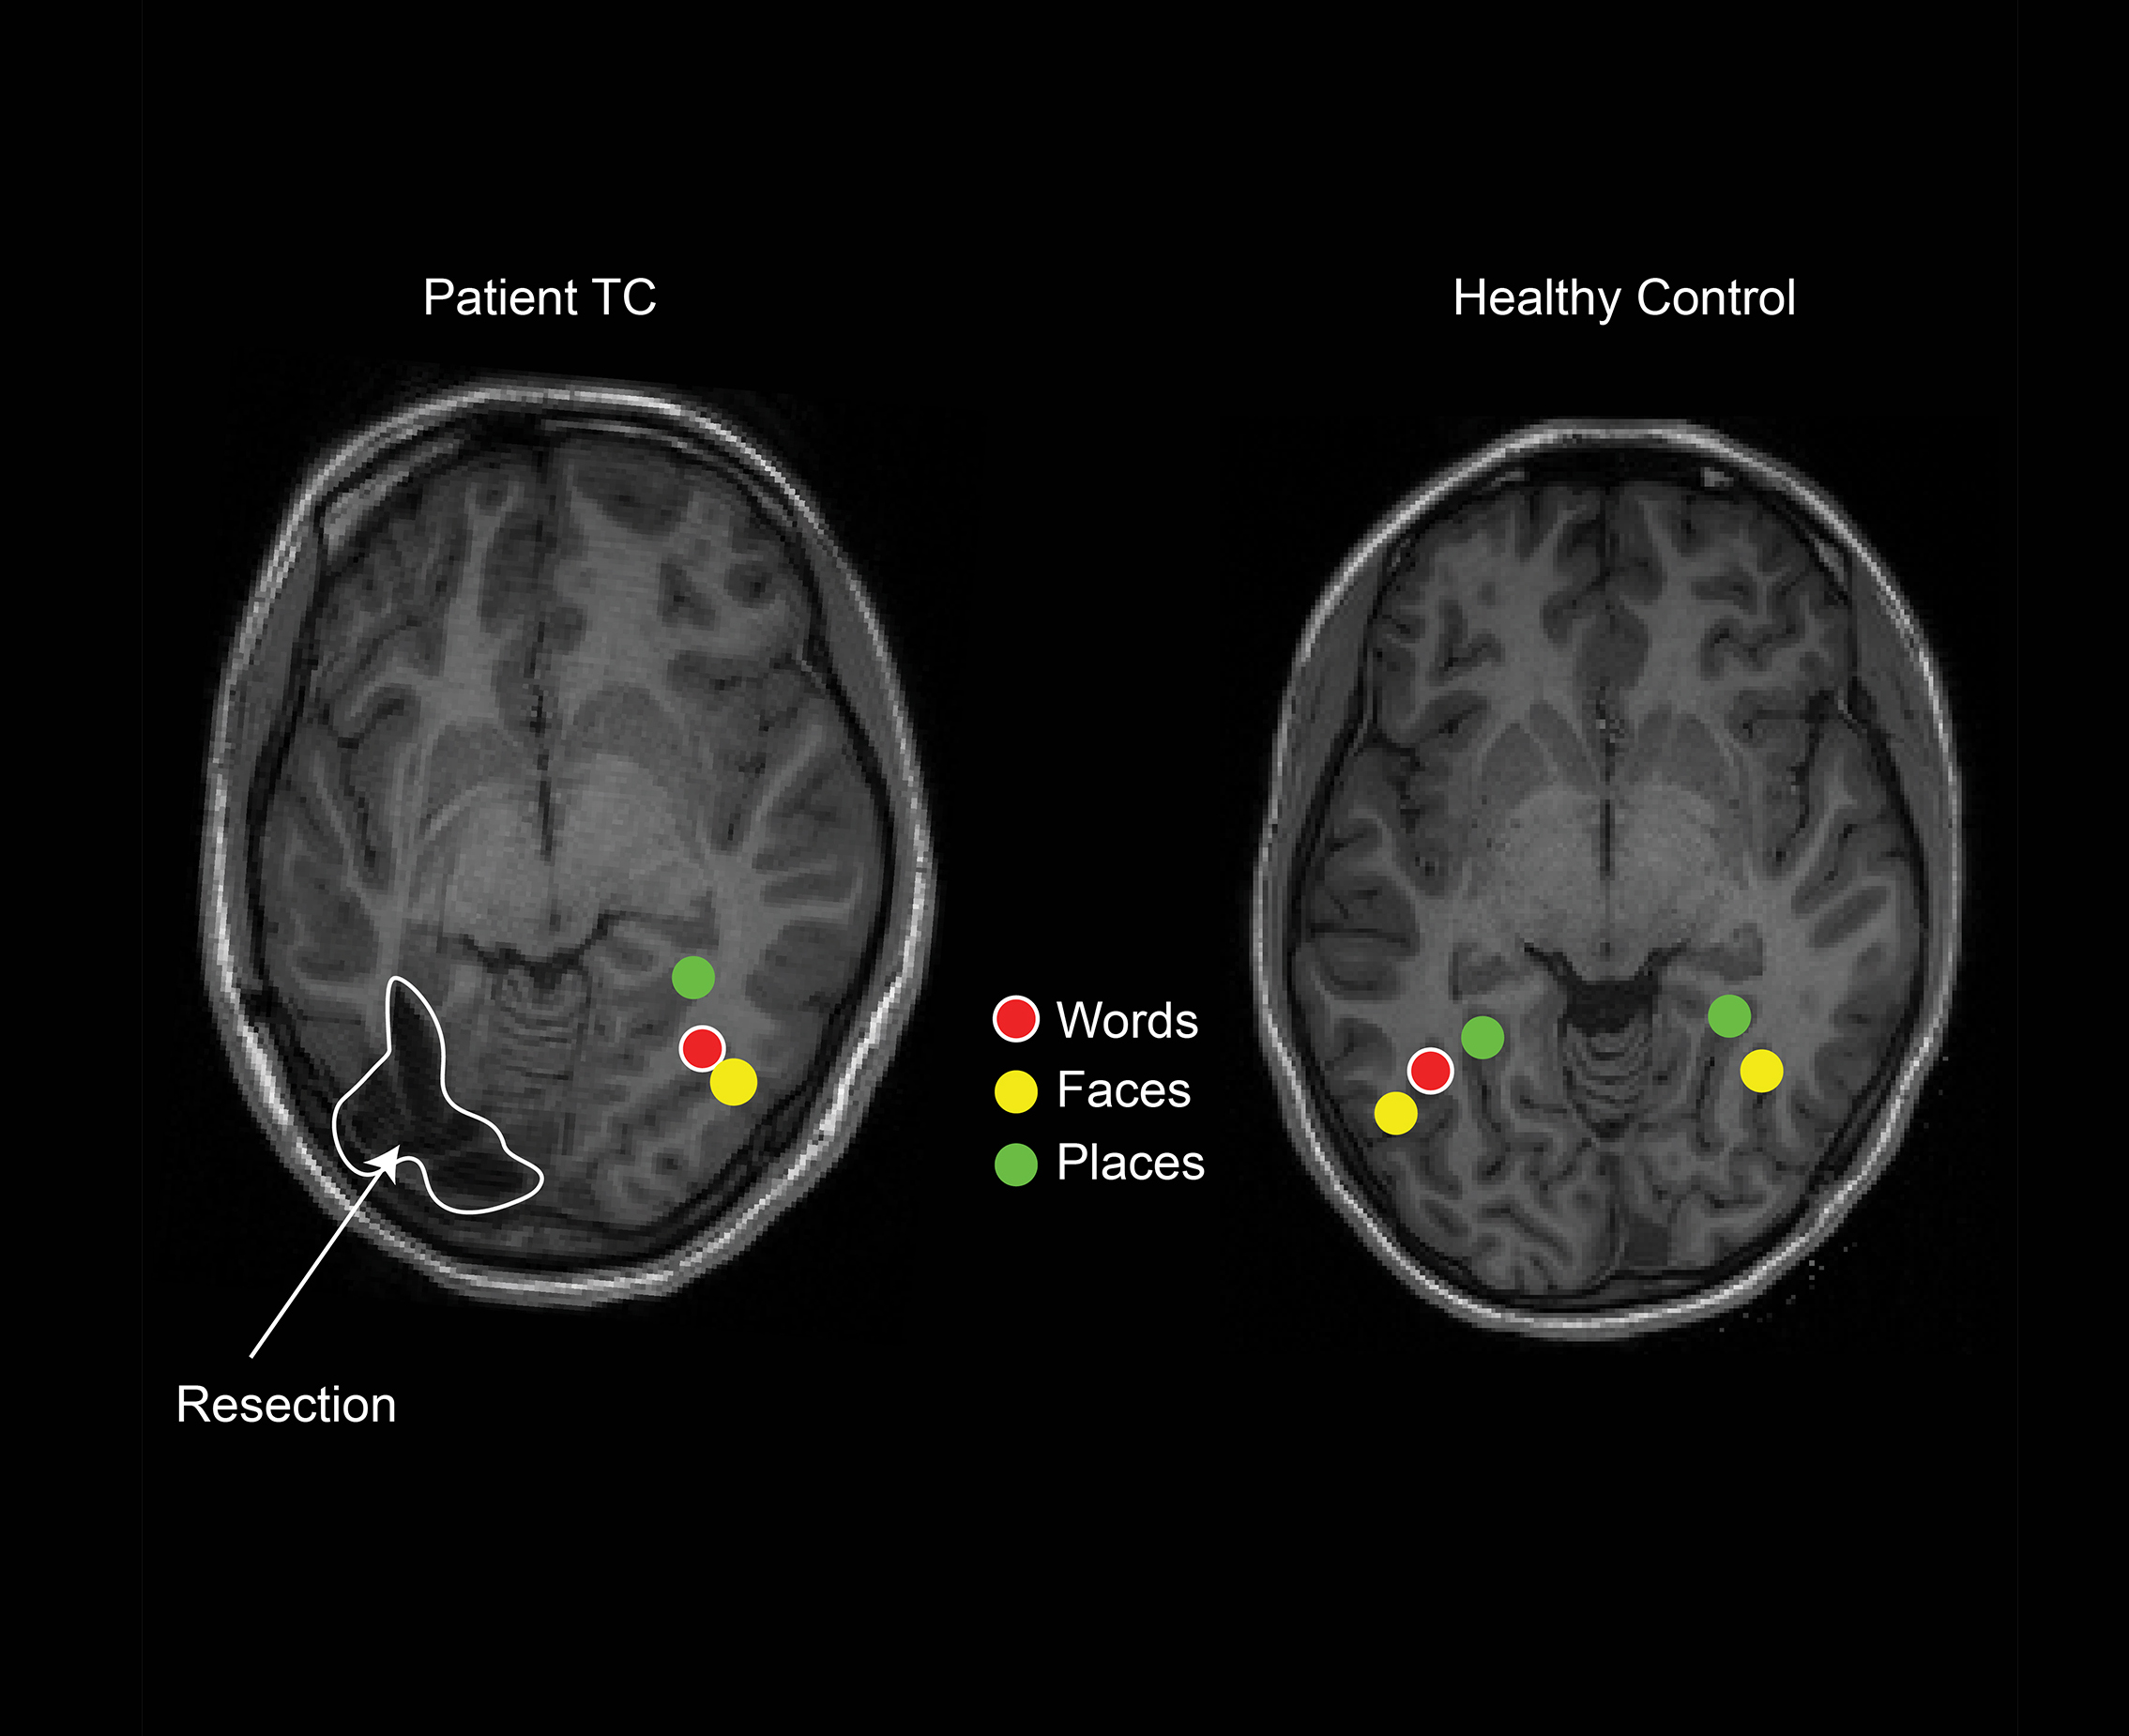 2D MRI brain scans of patient TC and a healthy control child reveal word, place, and face specific regions. Patient TC shows all three on the right, and resected region on the left. Healthy control has all three on the left, plus face and place on the rig